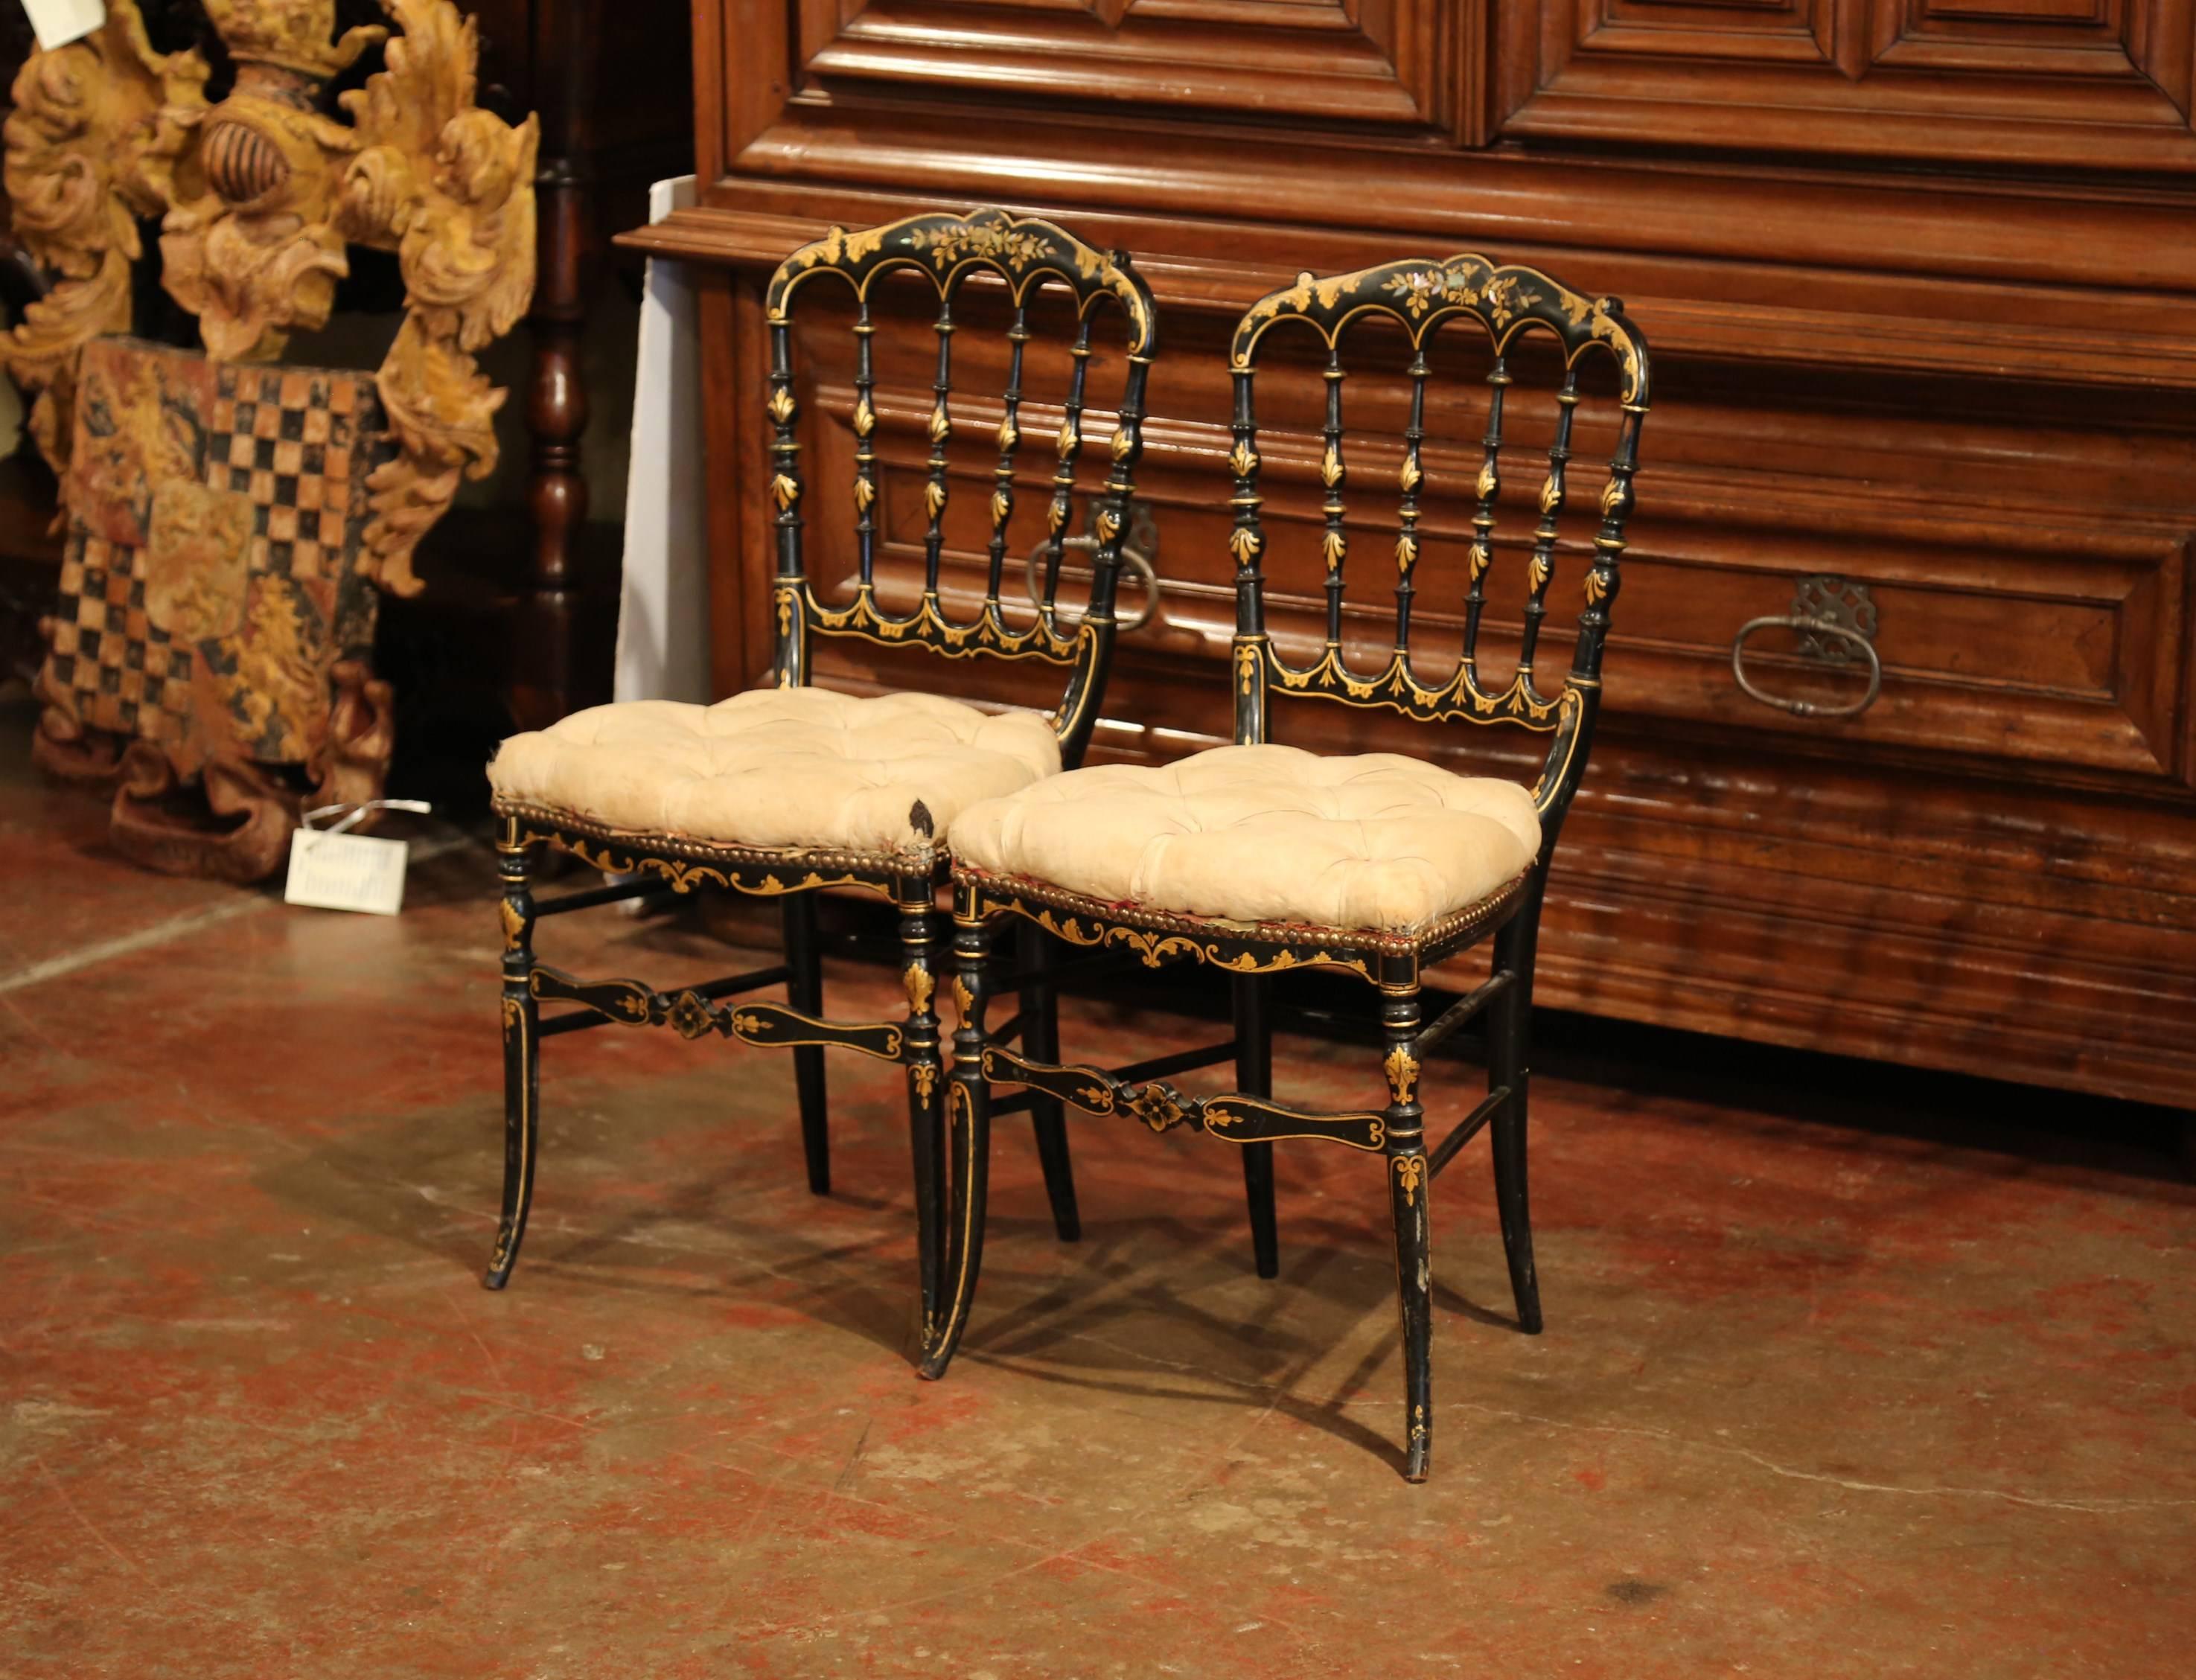 This elegant pair of chairs was created in France, circa 1870. Each antique petite chair frame features a ladder back with spindles, four curved legs and a front shaped apron. The chairs have a shiny, black lacquered paint finish and are embellished